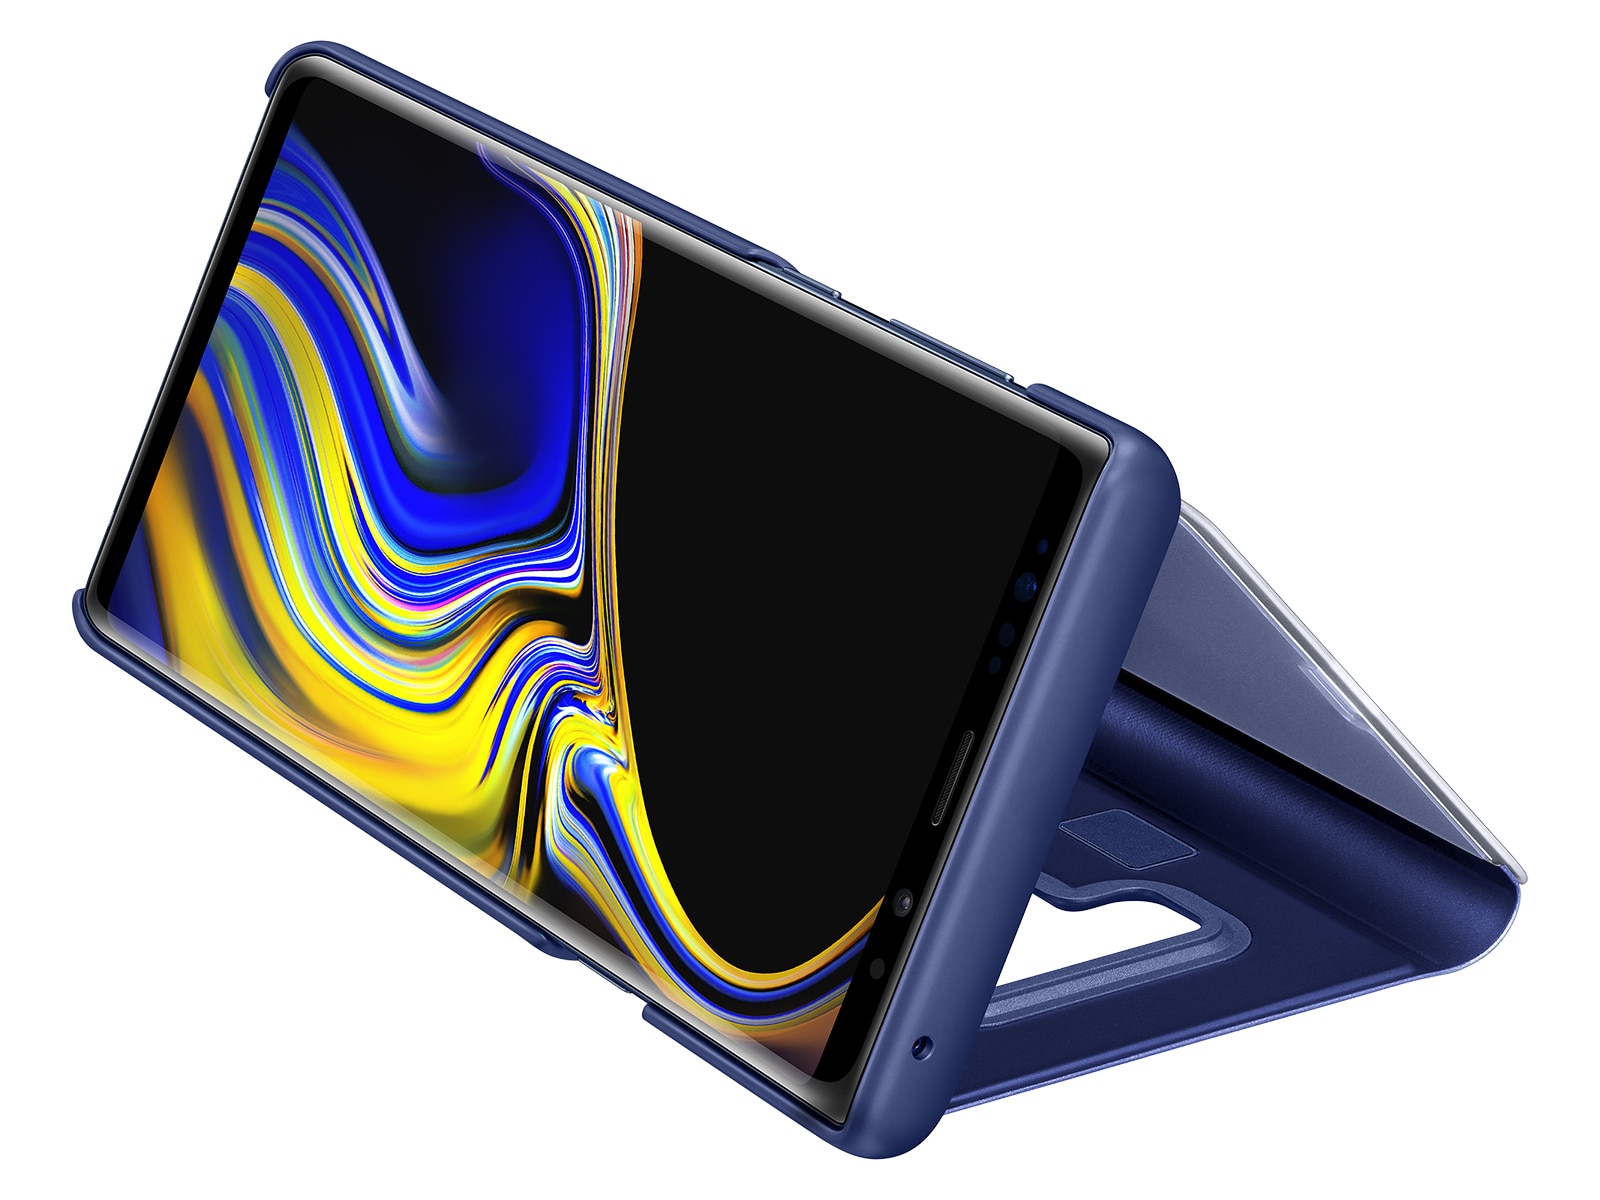 Thumbnail image of Galaxy Note9 S-View Flip Cover, Ocean Blue